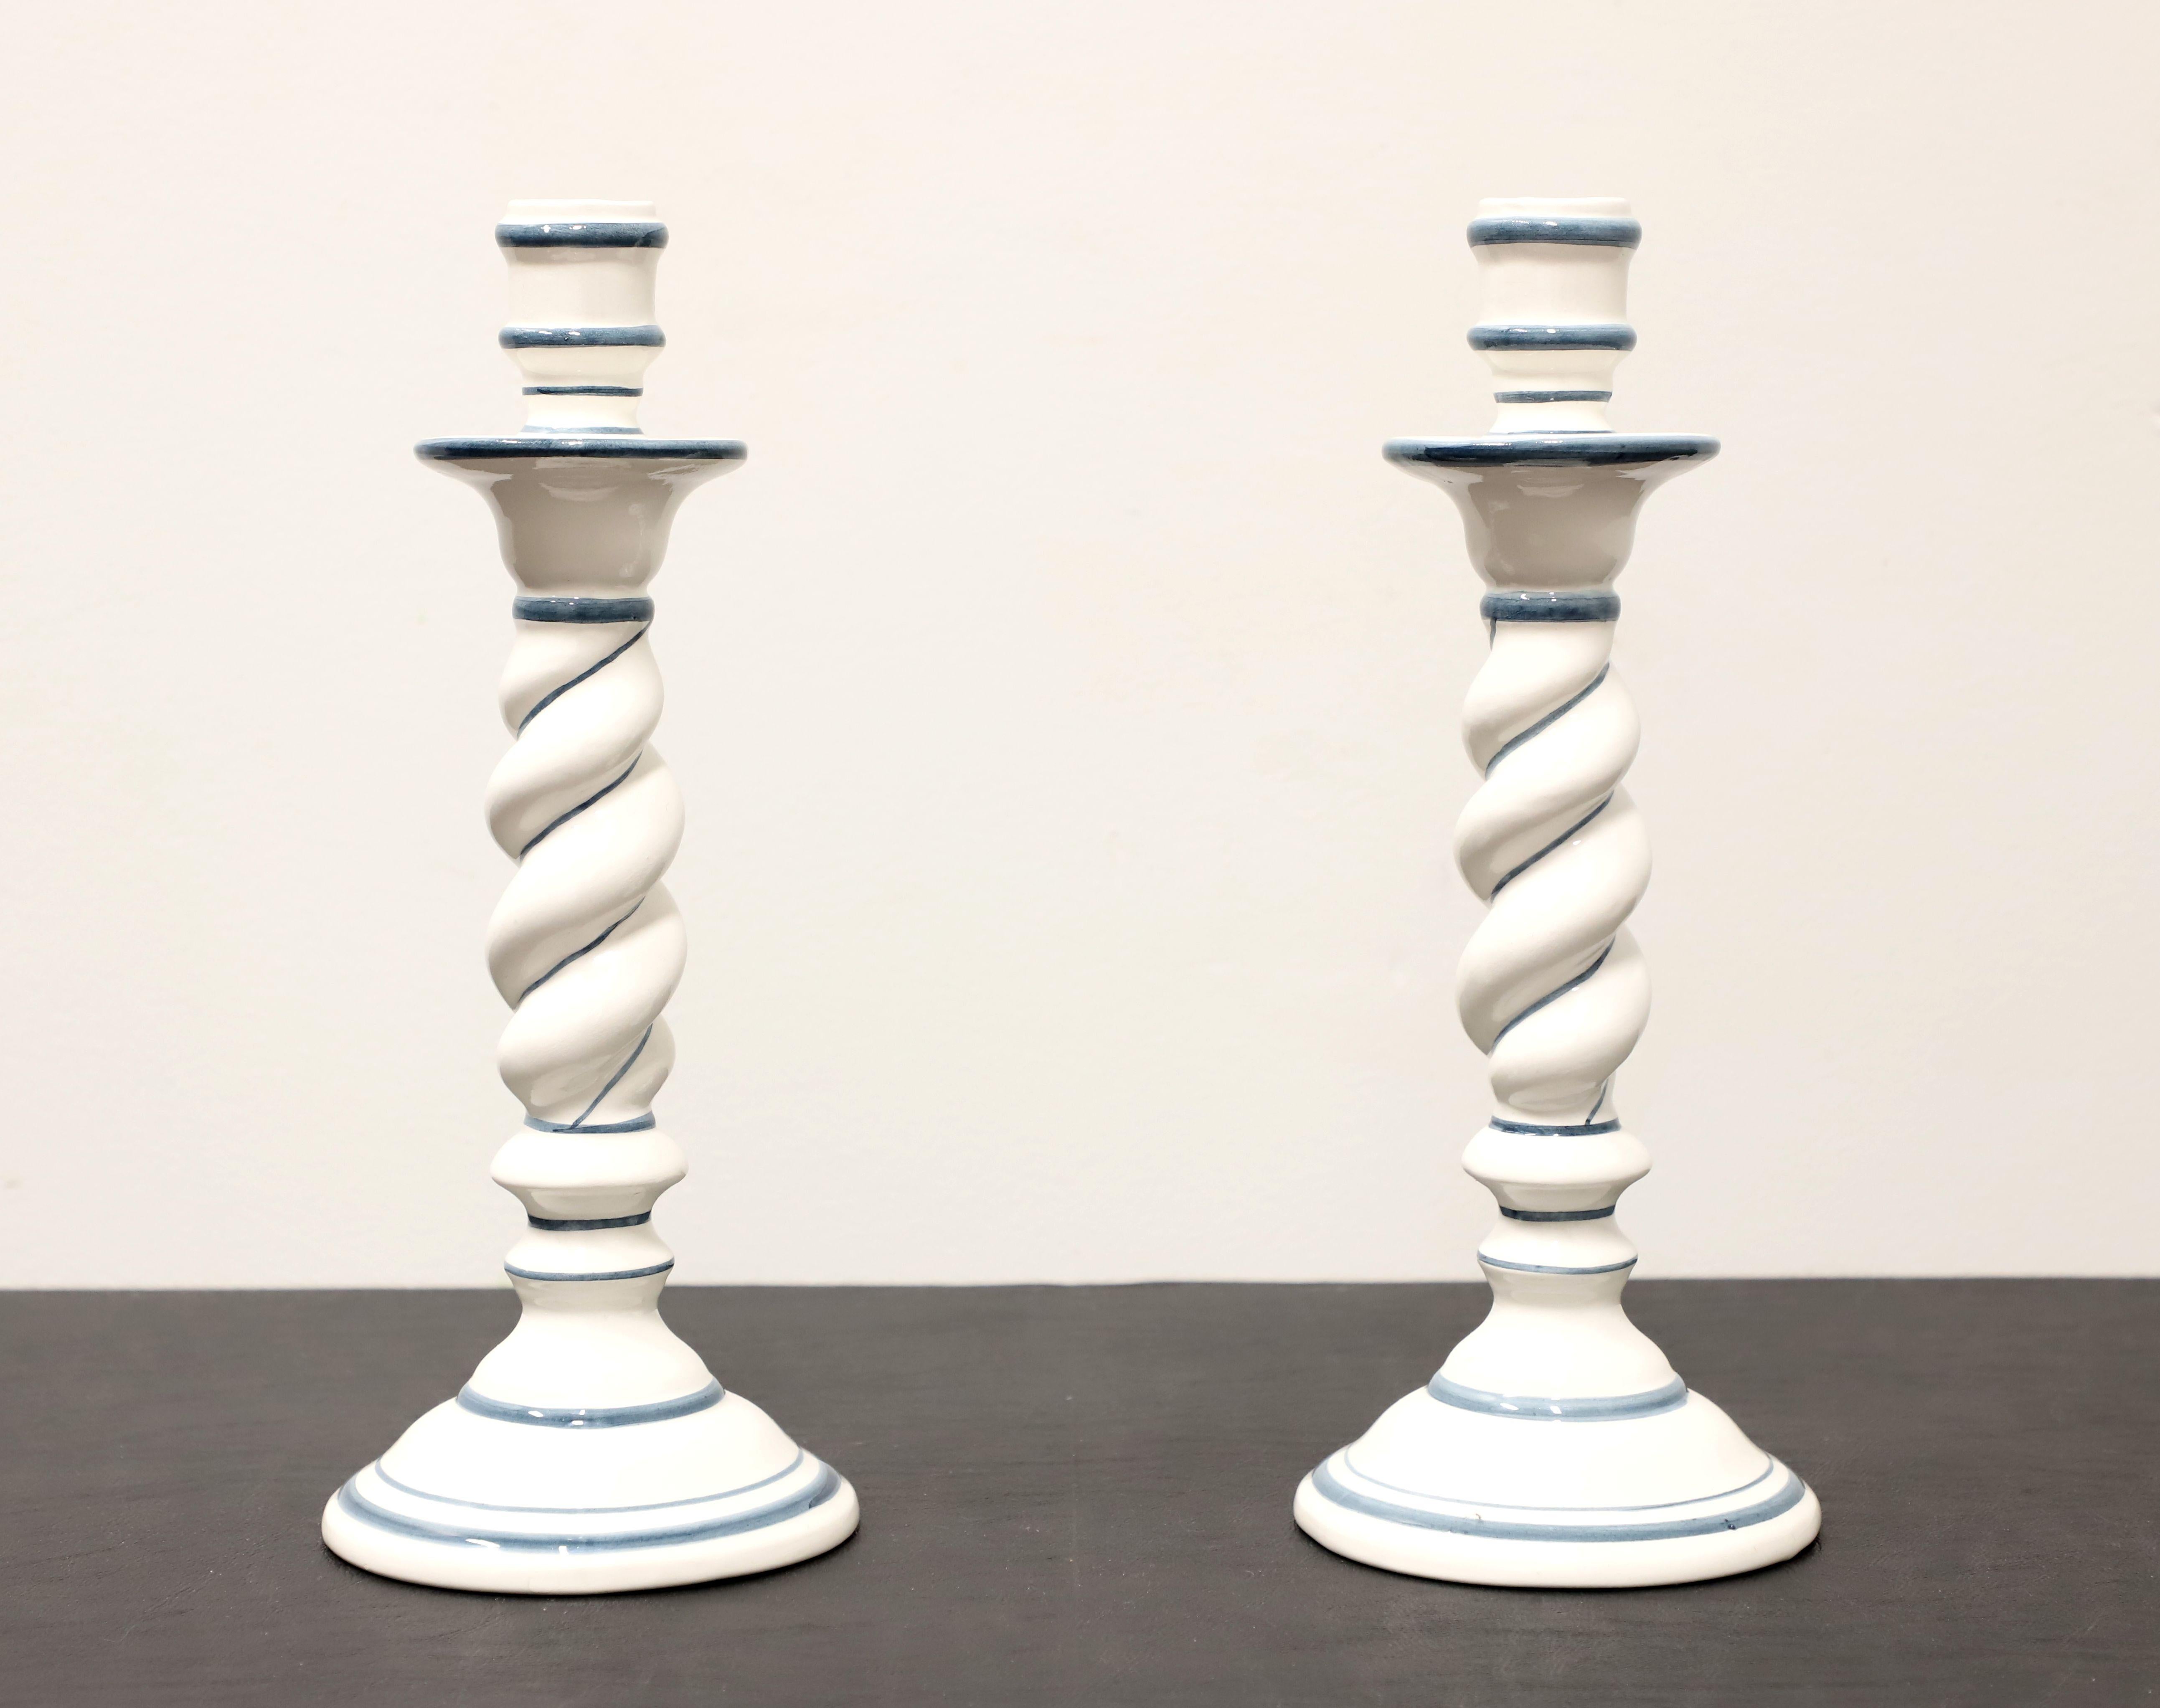 A pair of Contemporary style Italian candlesticks by OGG. Hand painted ceramic in white and navy blue color with a column-like form and distinct twist shape. Made in Italy, in the Mid 20th Century. 

Measures: 4.5w 4.5d 11h, Weighs: 1 lb